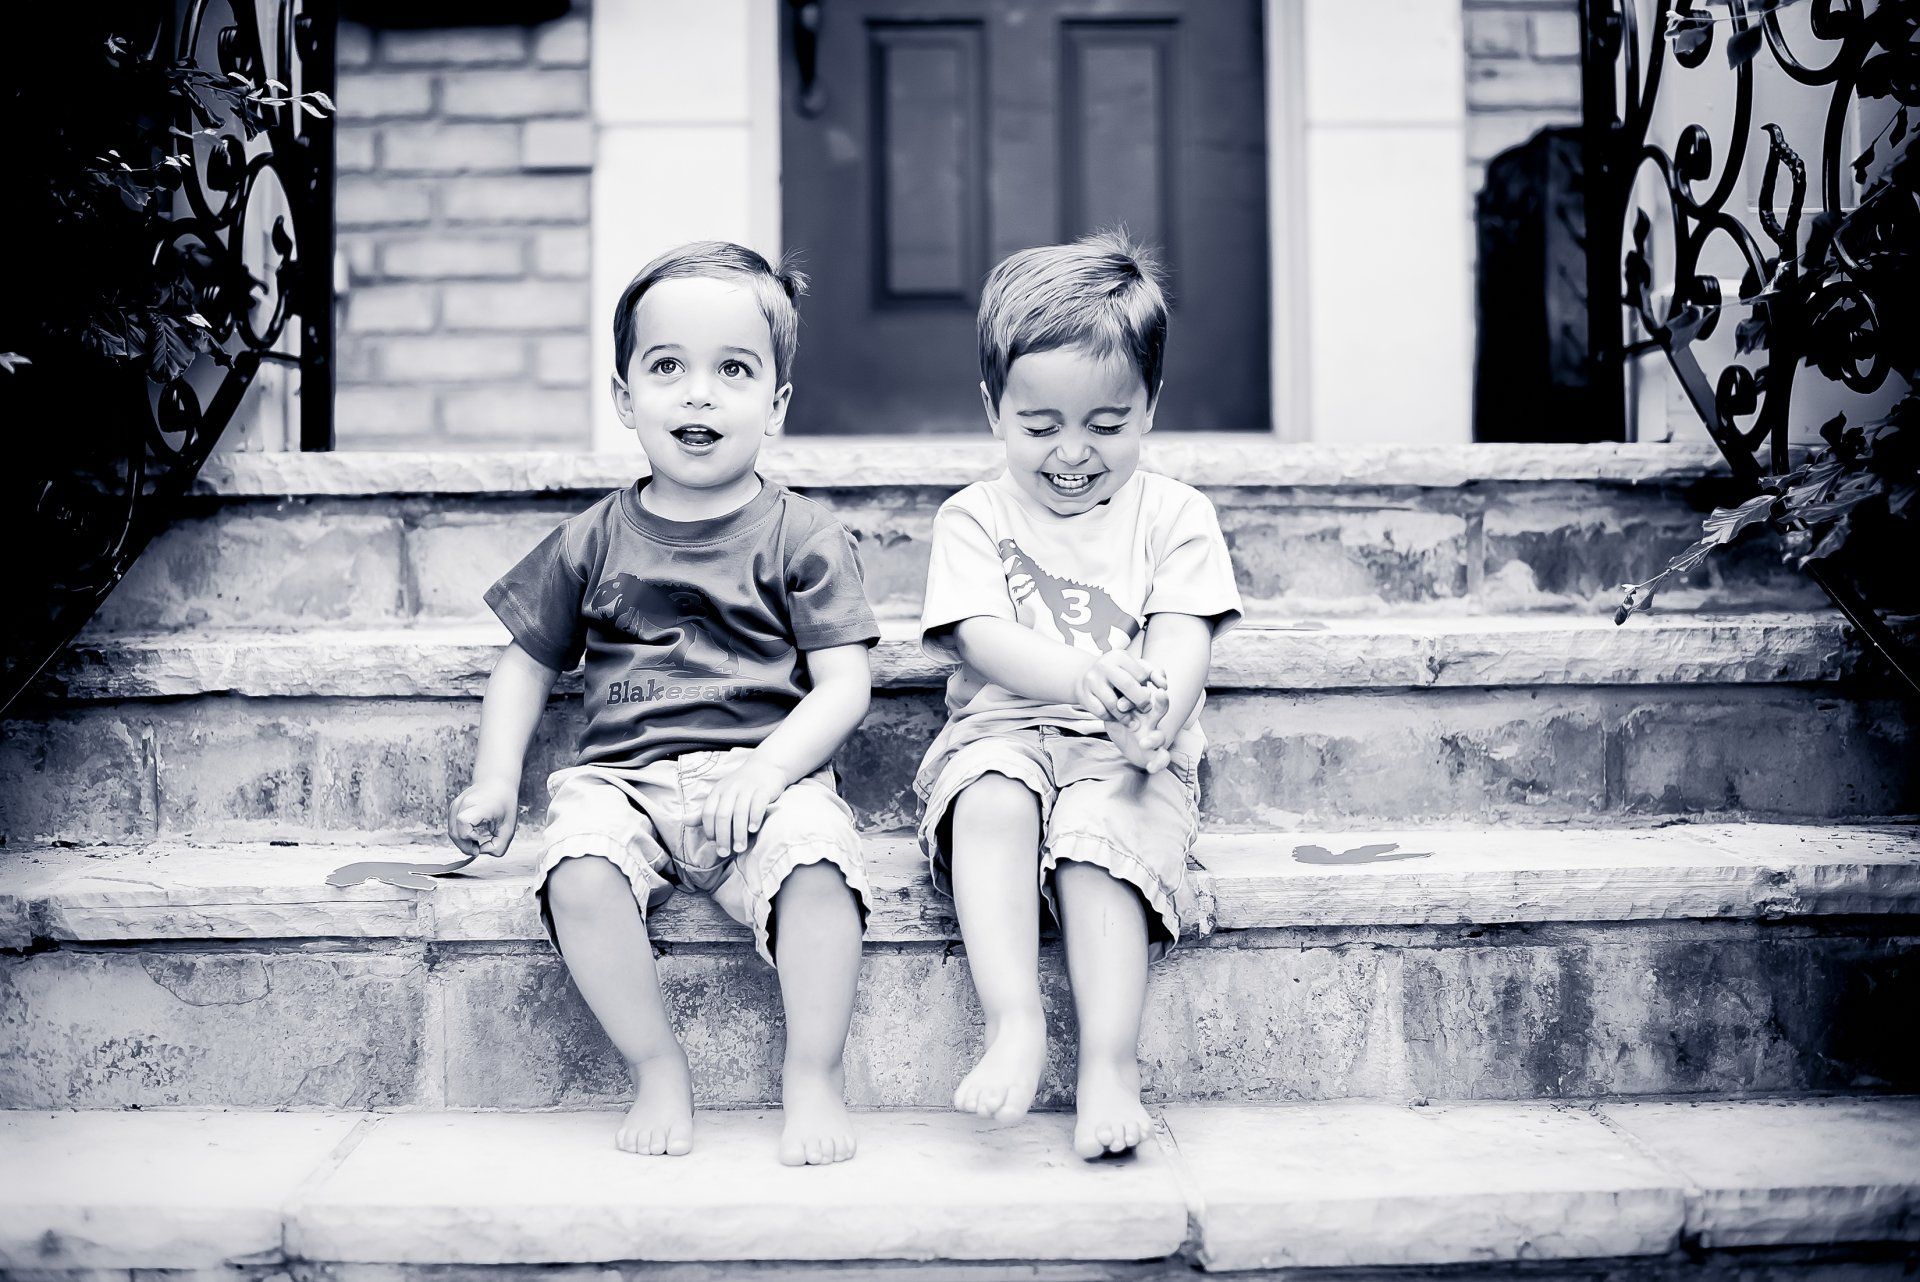 Family photographer Toronto | Stacey Naglie | Two young boys sitting on outdoor steps